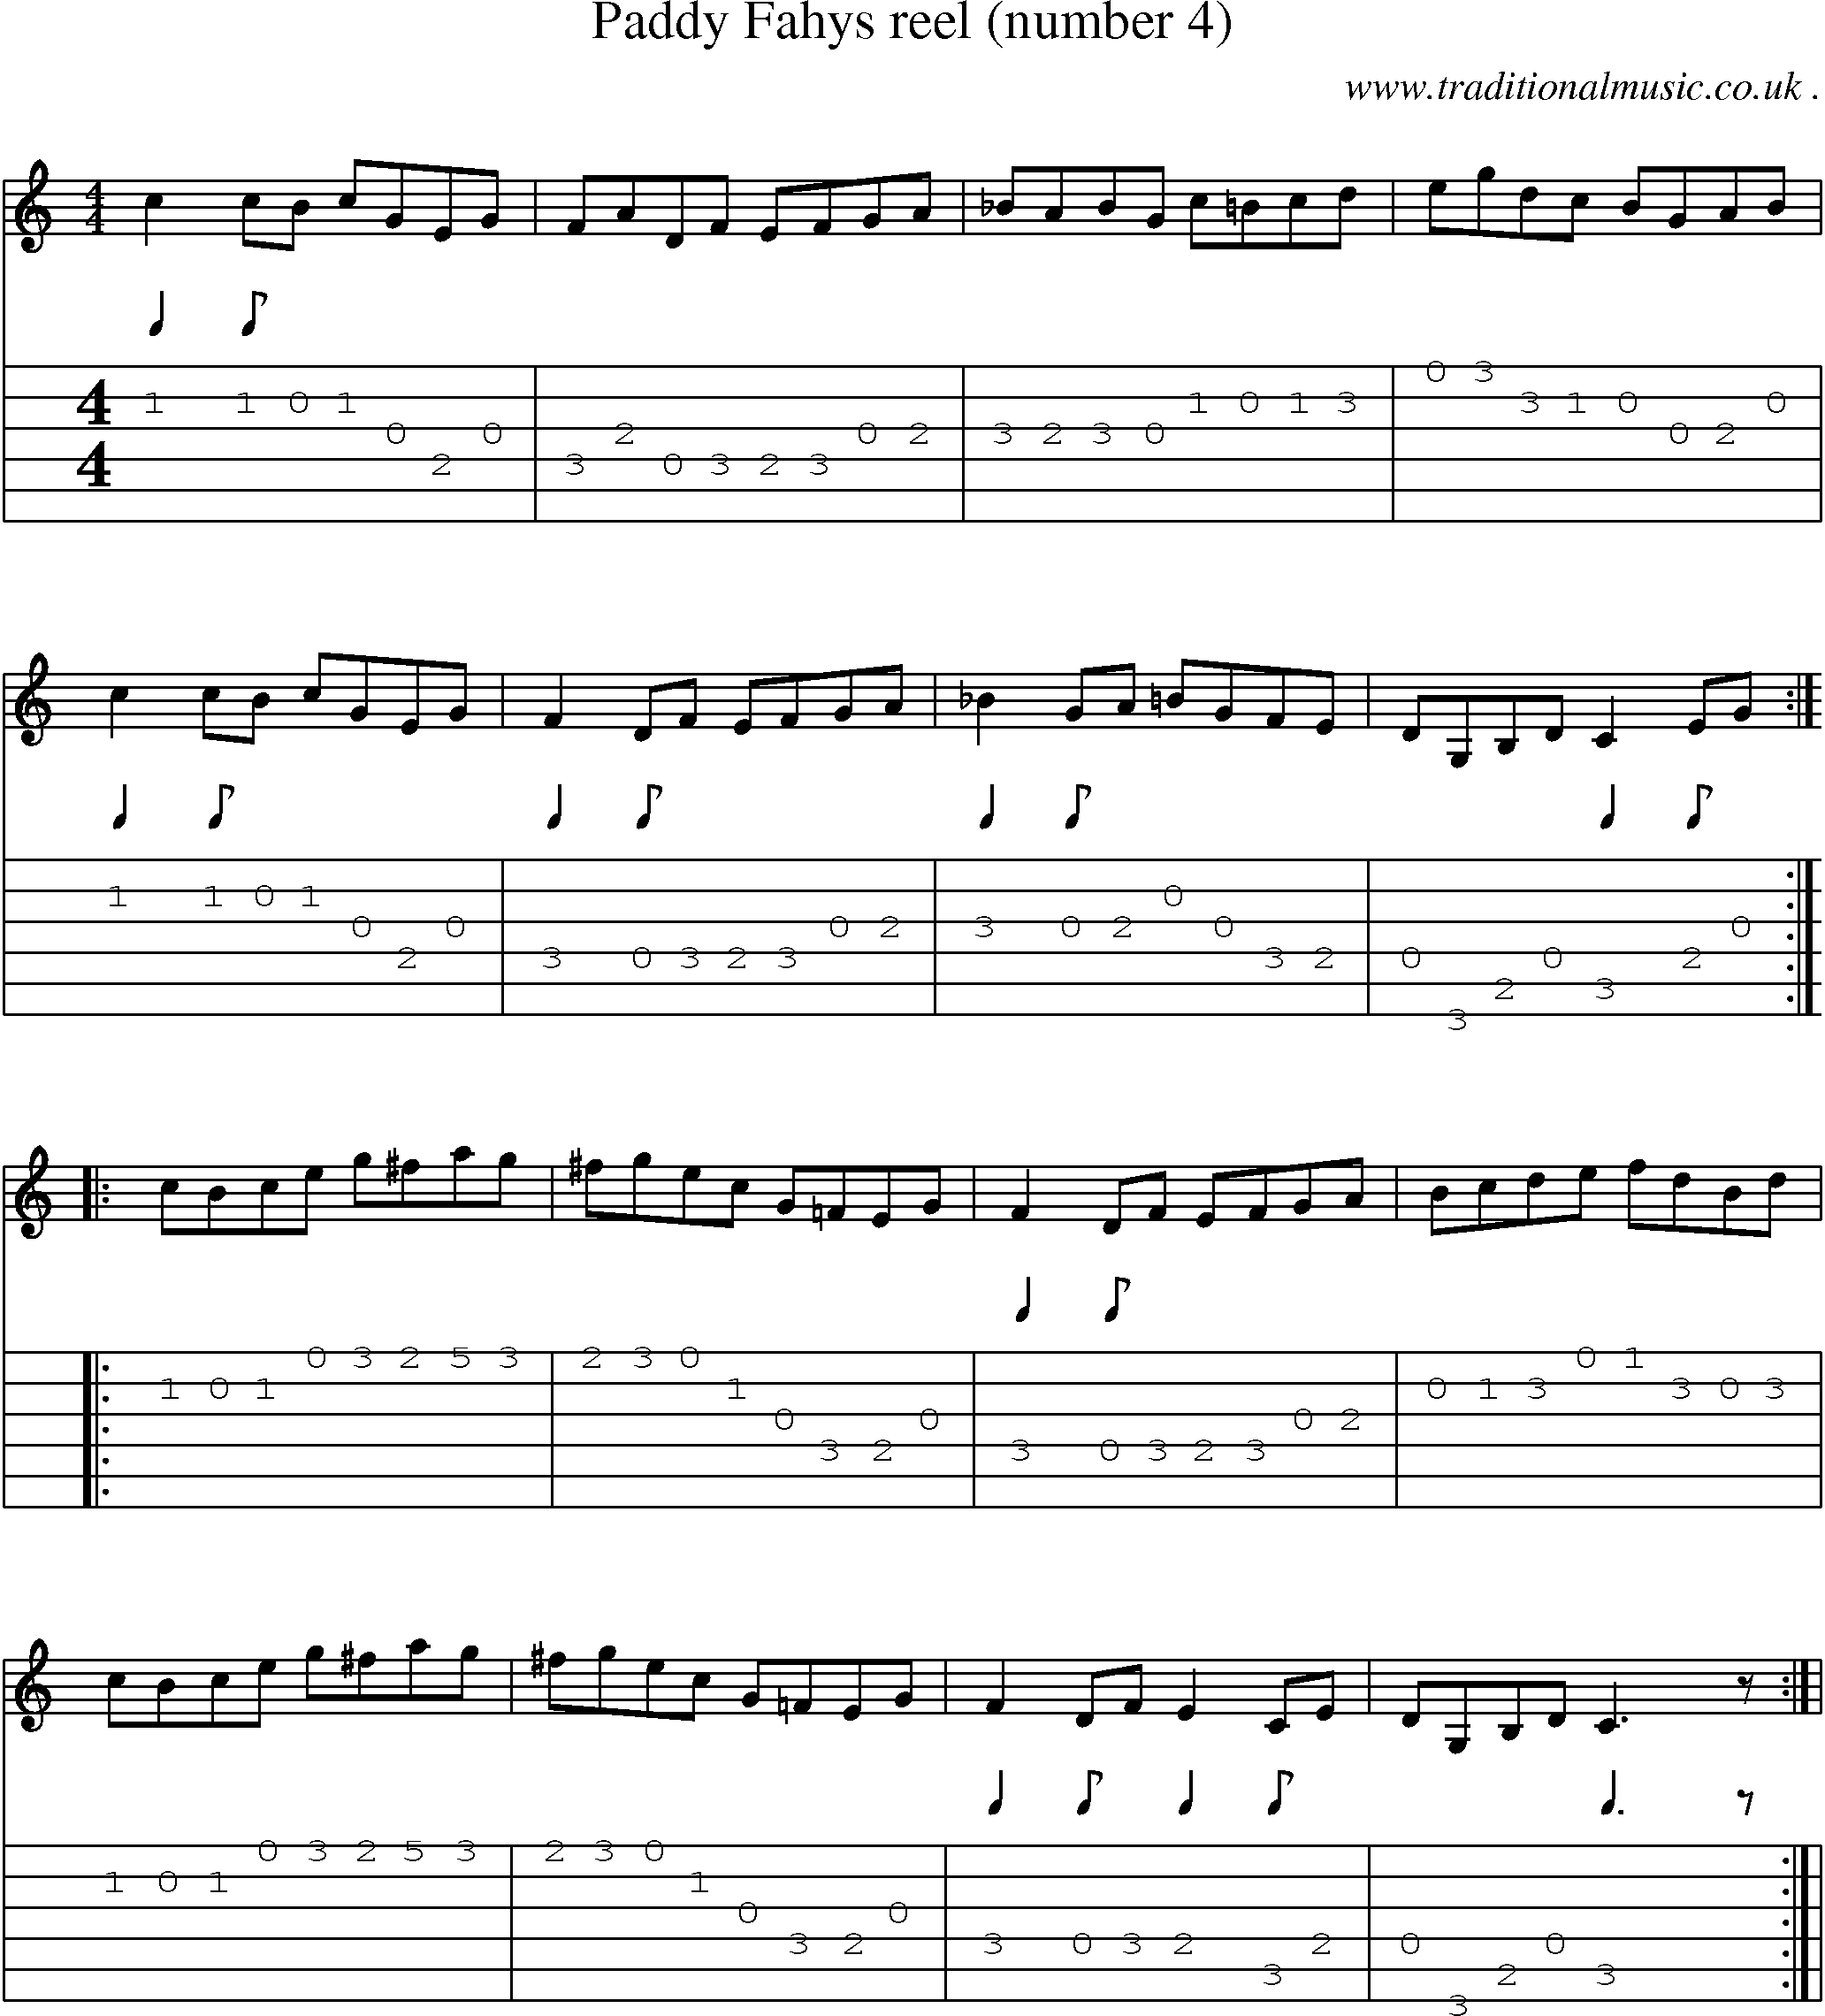 Sheet-Music and Guitar Tabs for Paddy Fahys Reel (number 4)